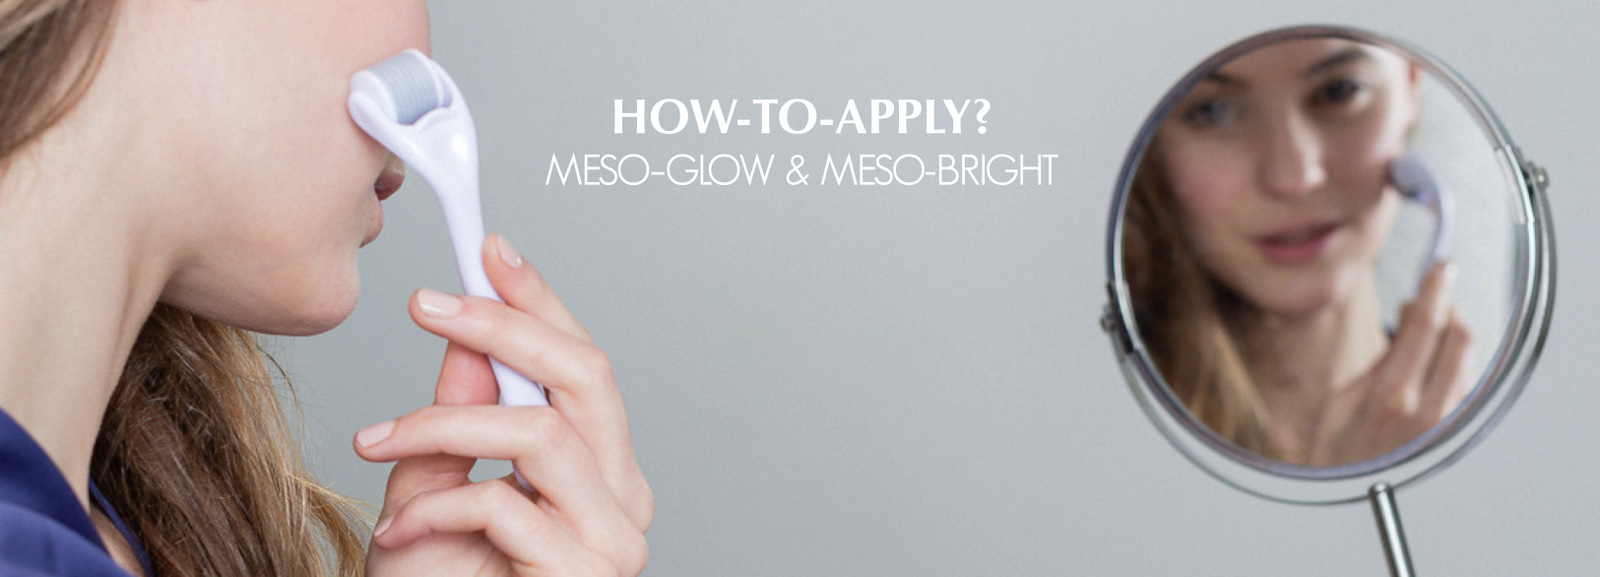 How To Apply - MESO-GLOW & MESO-BRIGHT - At Home Mesotherapy by Laboratoires Surface-Paris